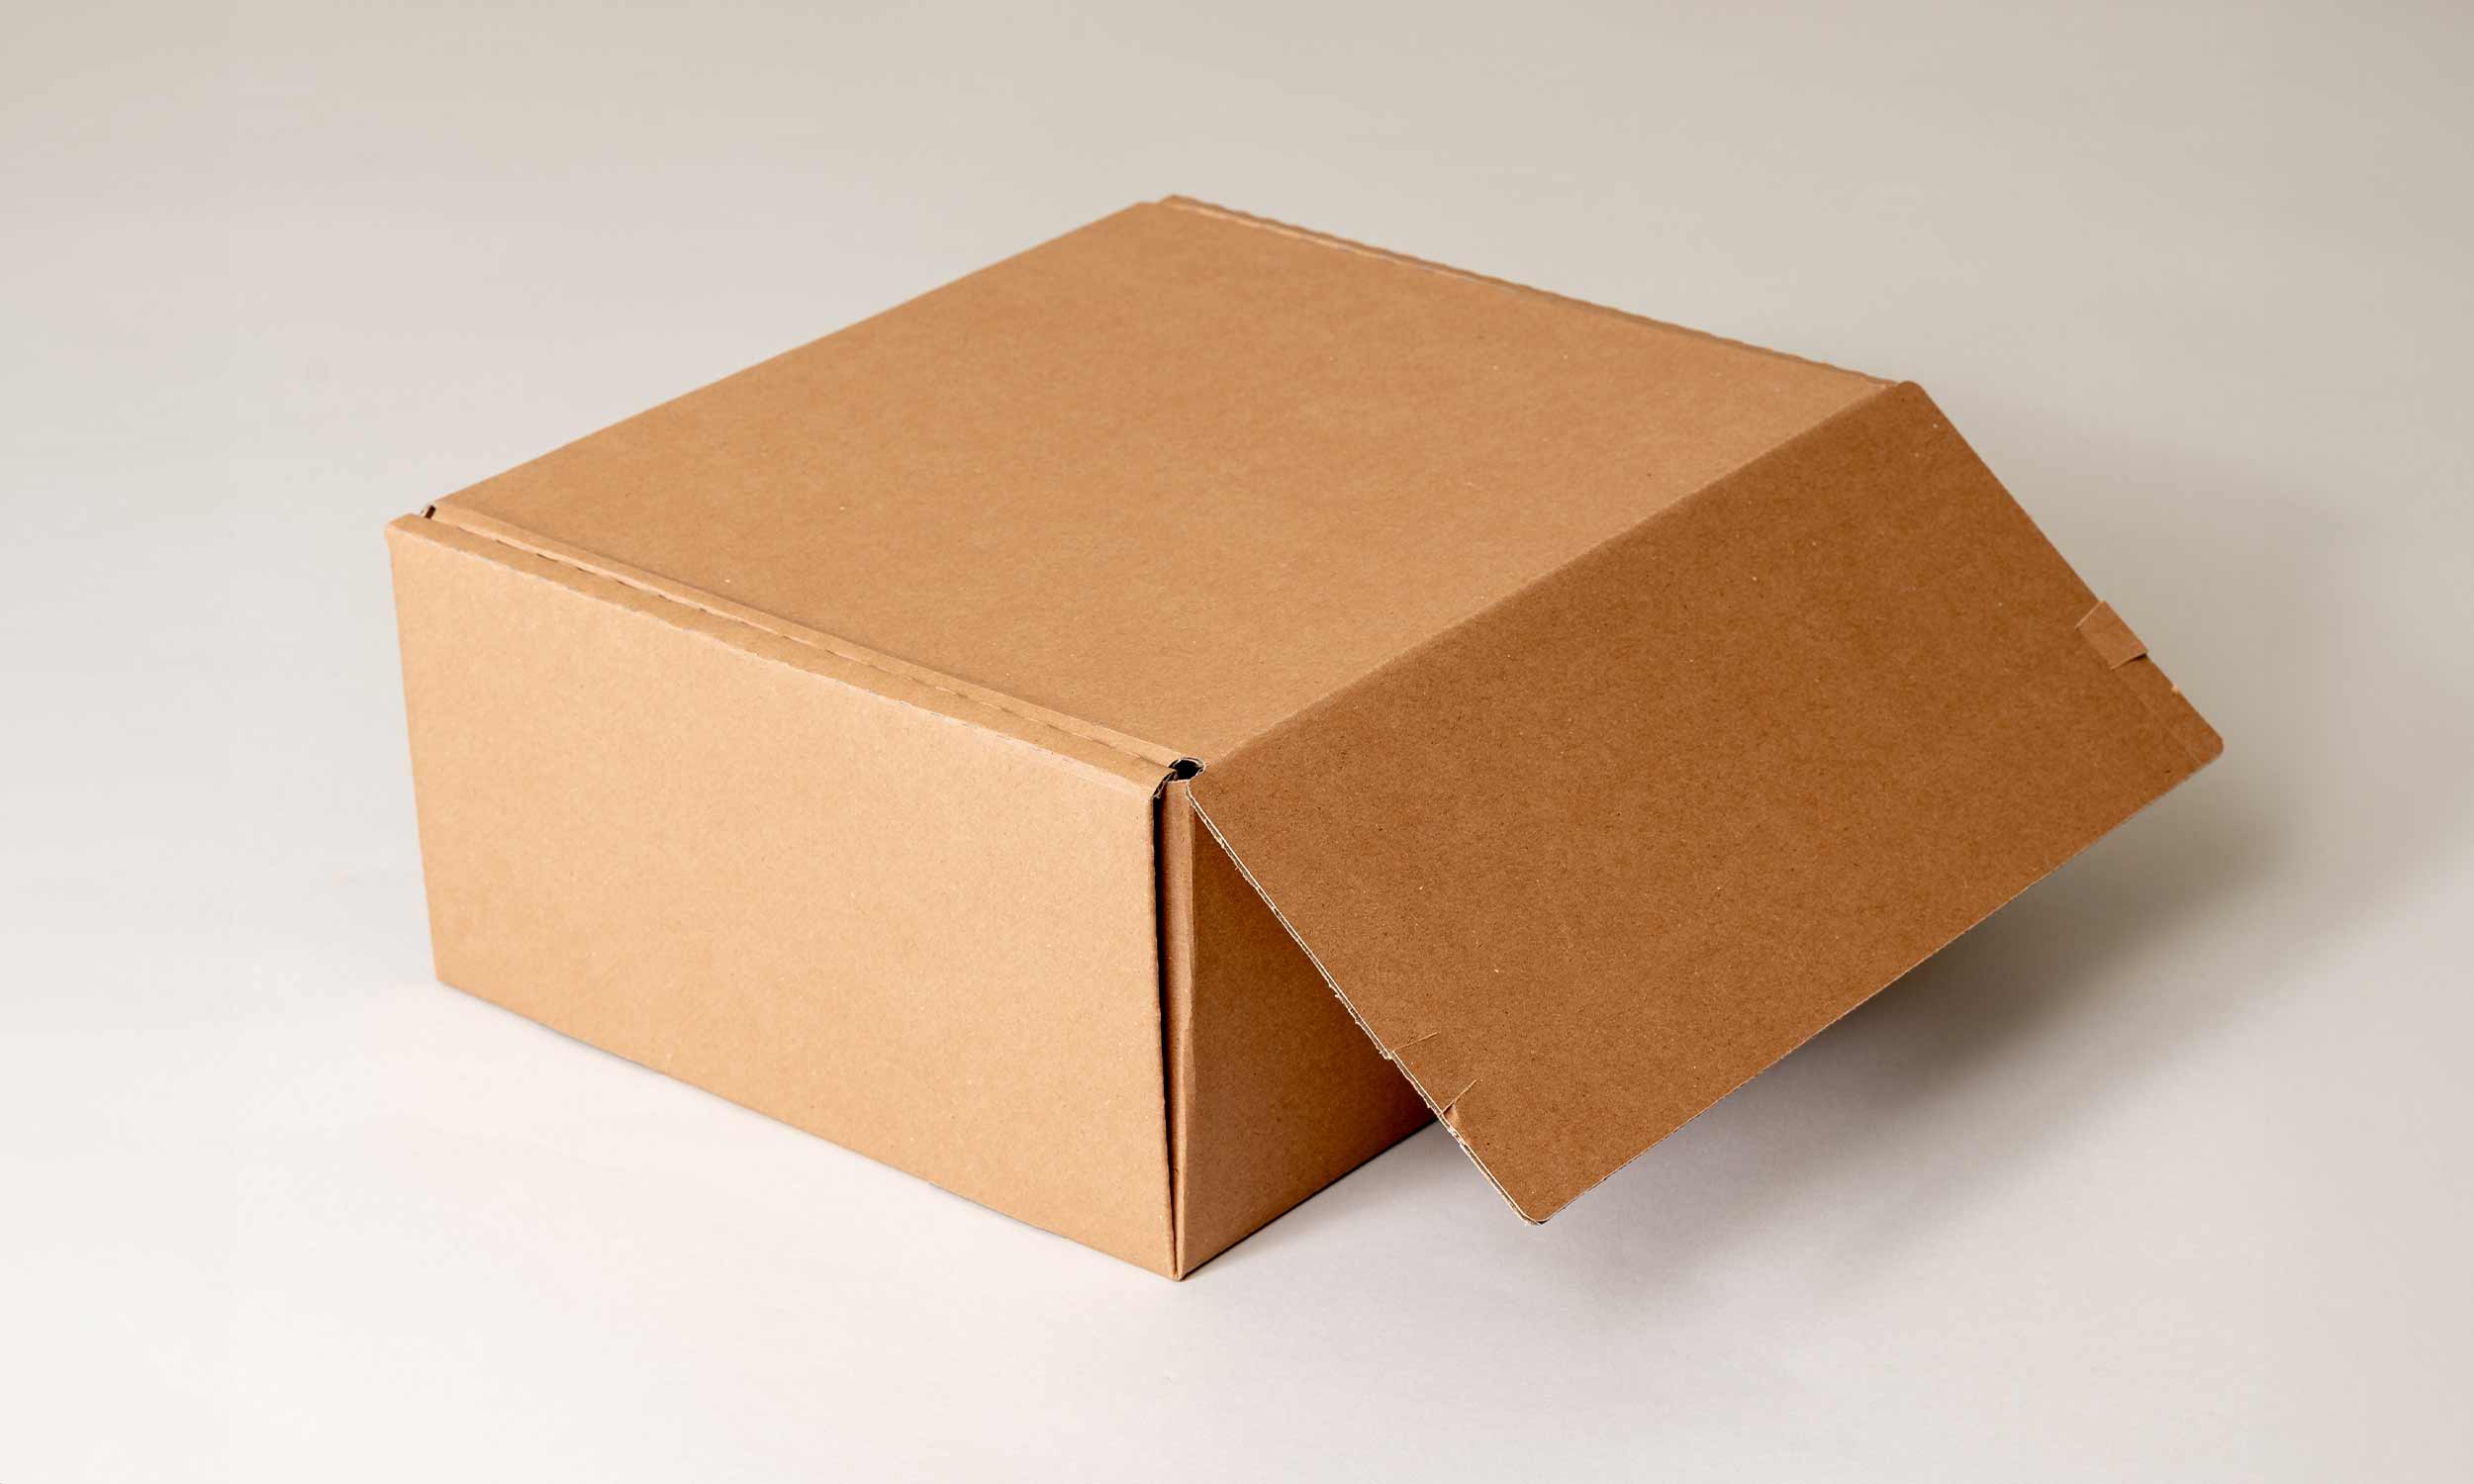 E-commerce box made from brown corrugated cardboard